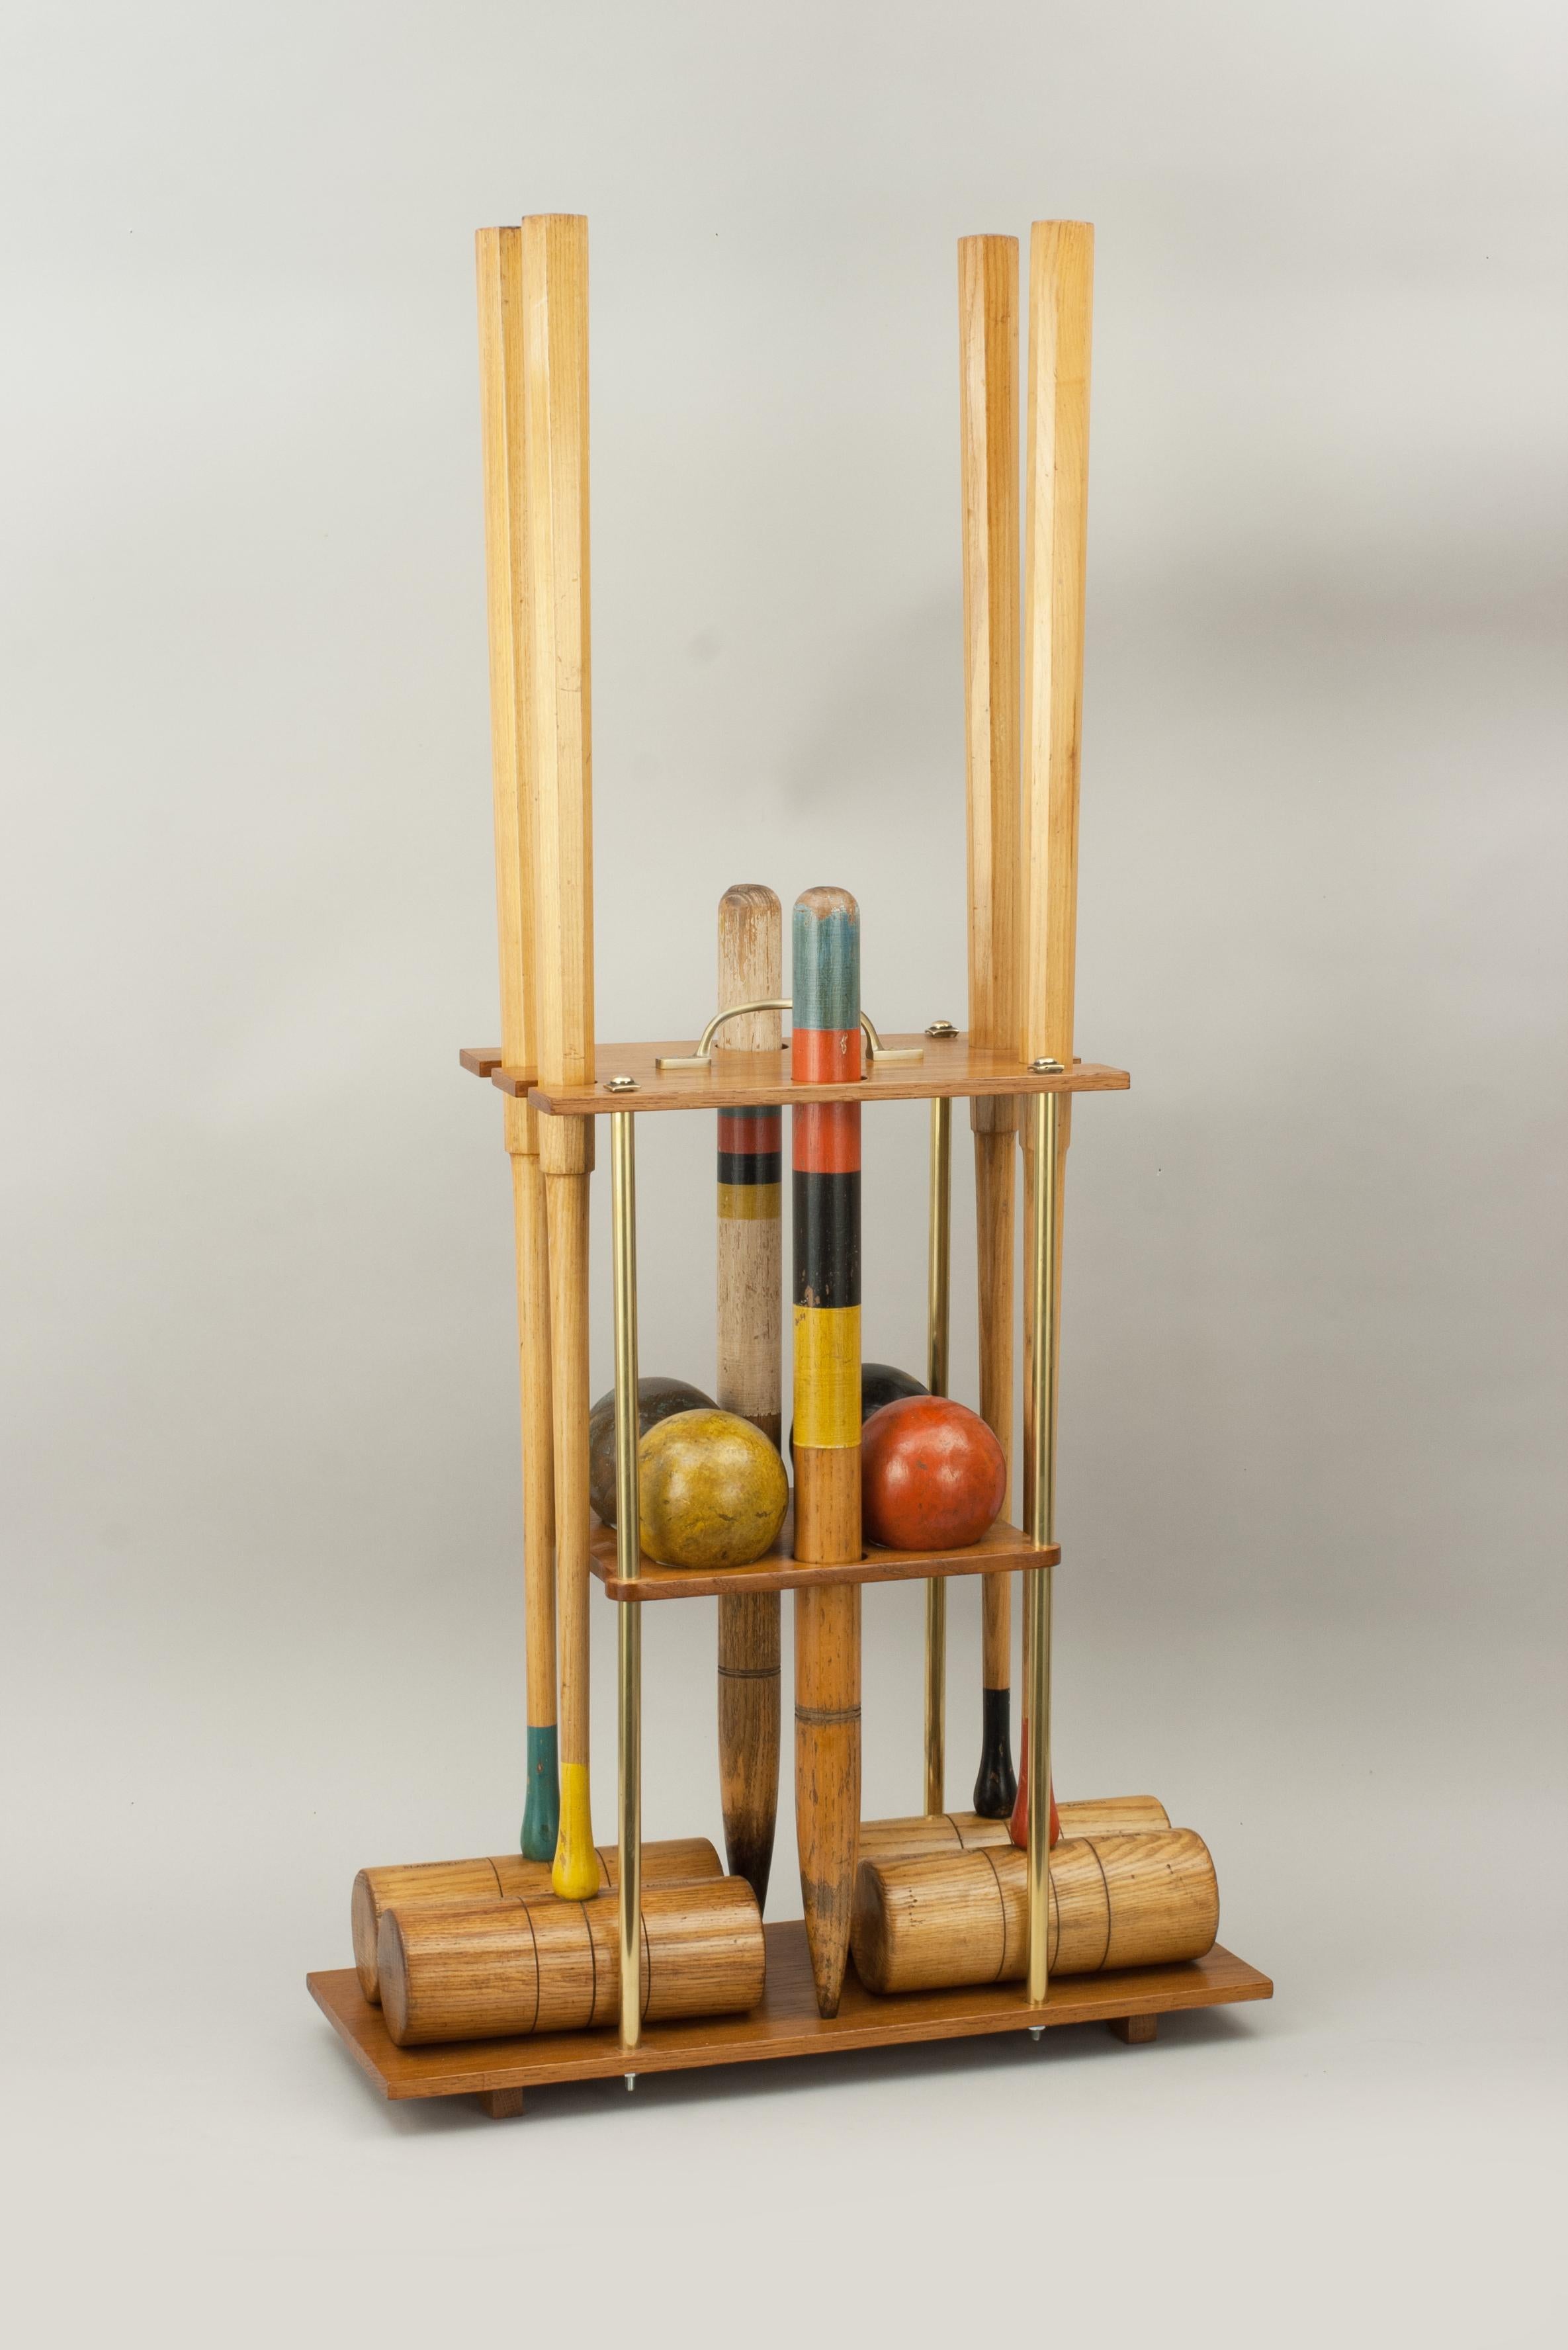 Ash croquet set by Slazenger on carry stand.
A fabulous Slazenger garden croquet set with four ash mallets on a new oak croquet carry stand. To complete the set there are four colored balls in the standard croquet colors, six bent metal hoops and